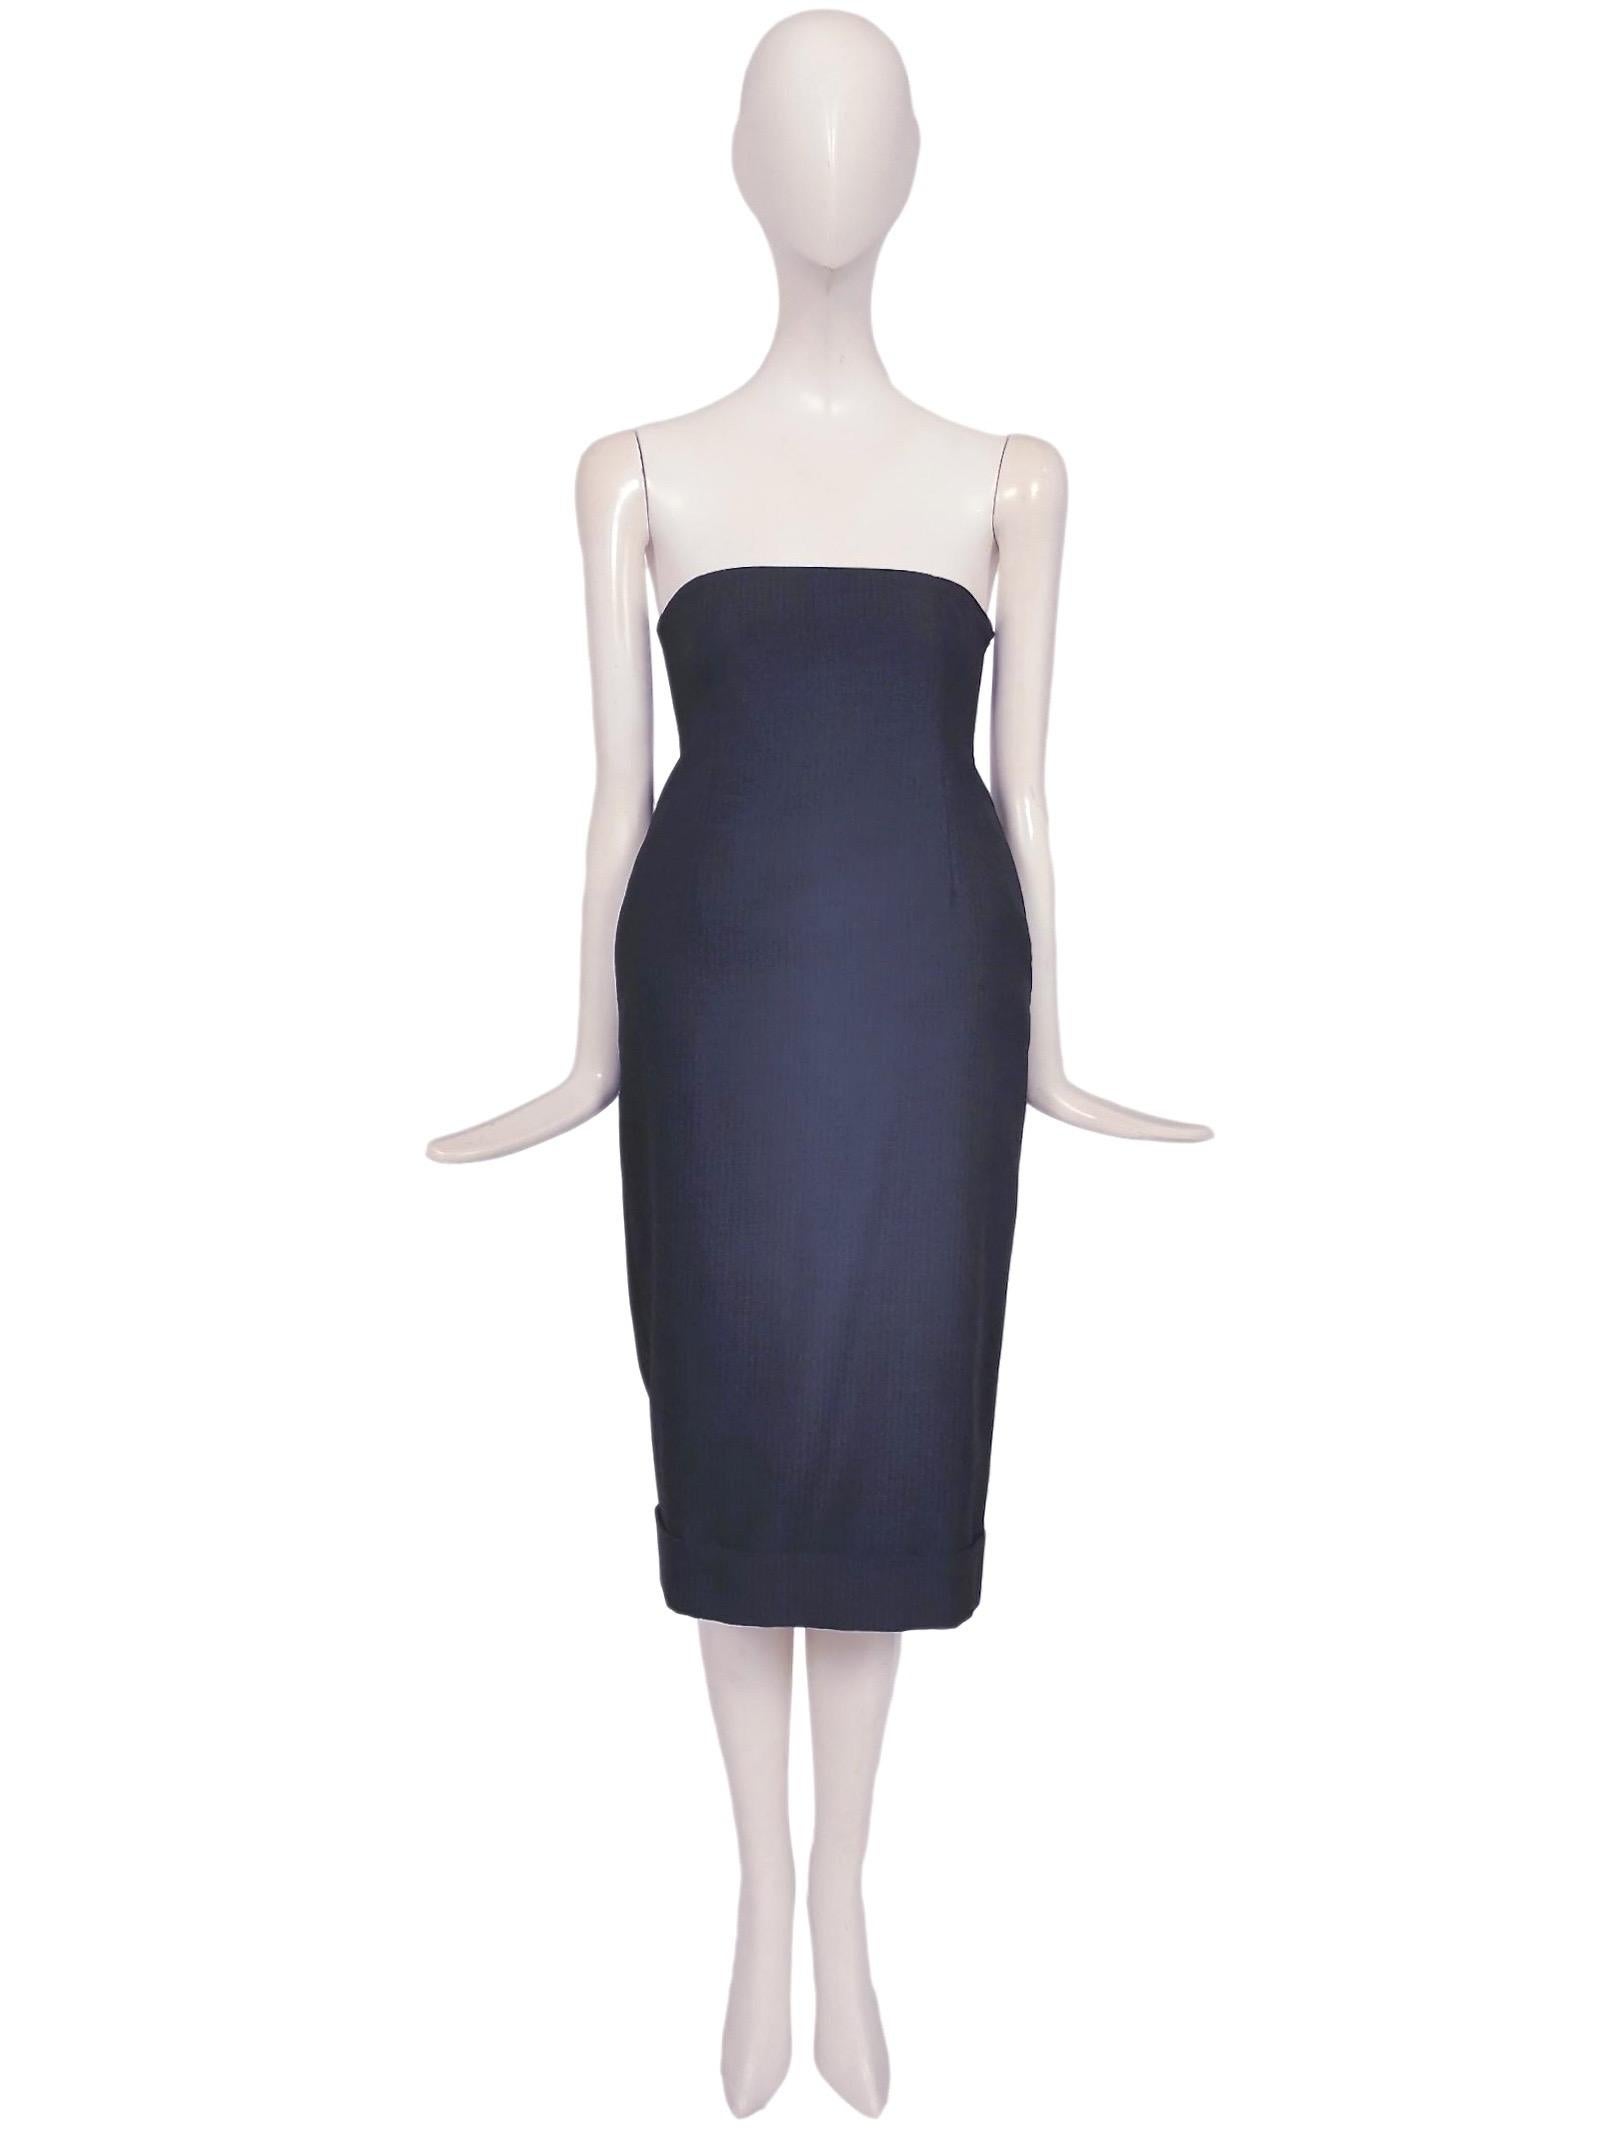 Alexander McQueen
1996 Tight Fitting Bodice Dress
Fitted Dress
Size 40
